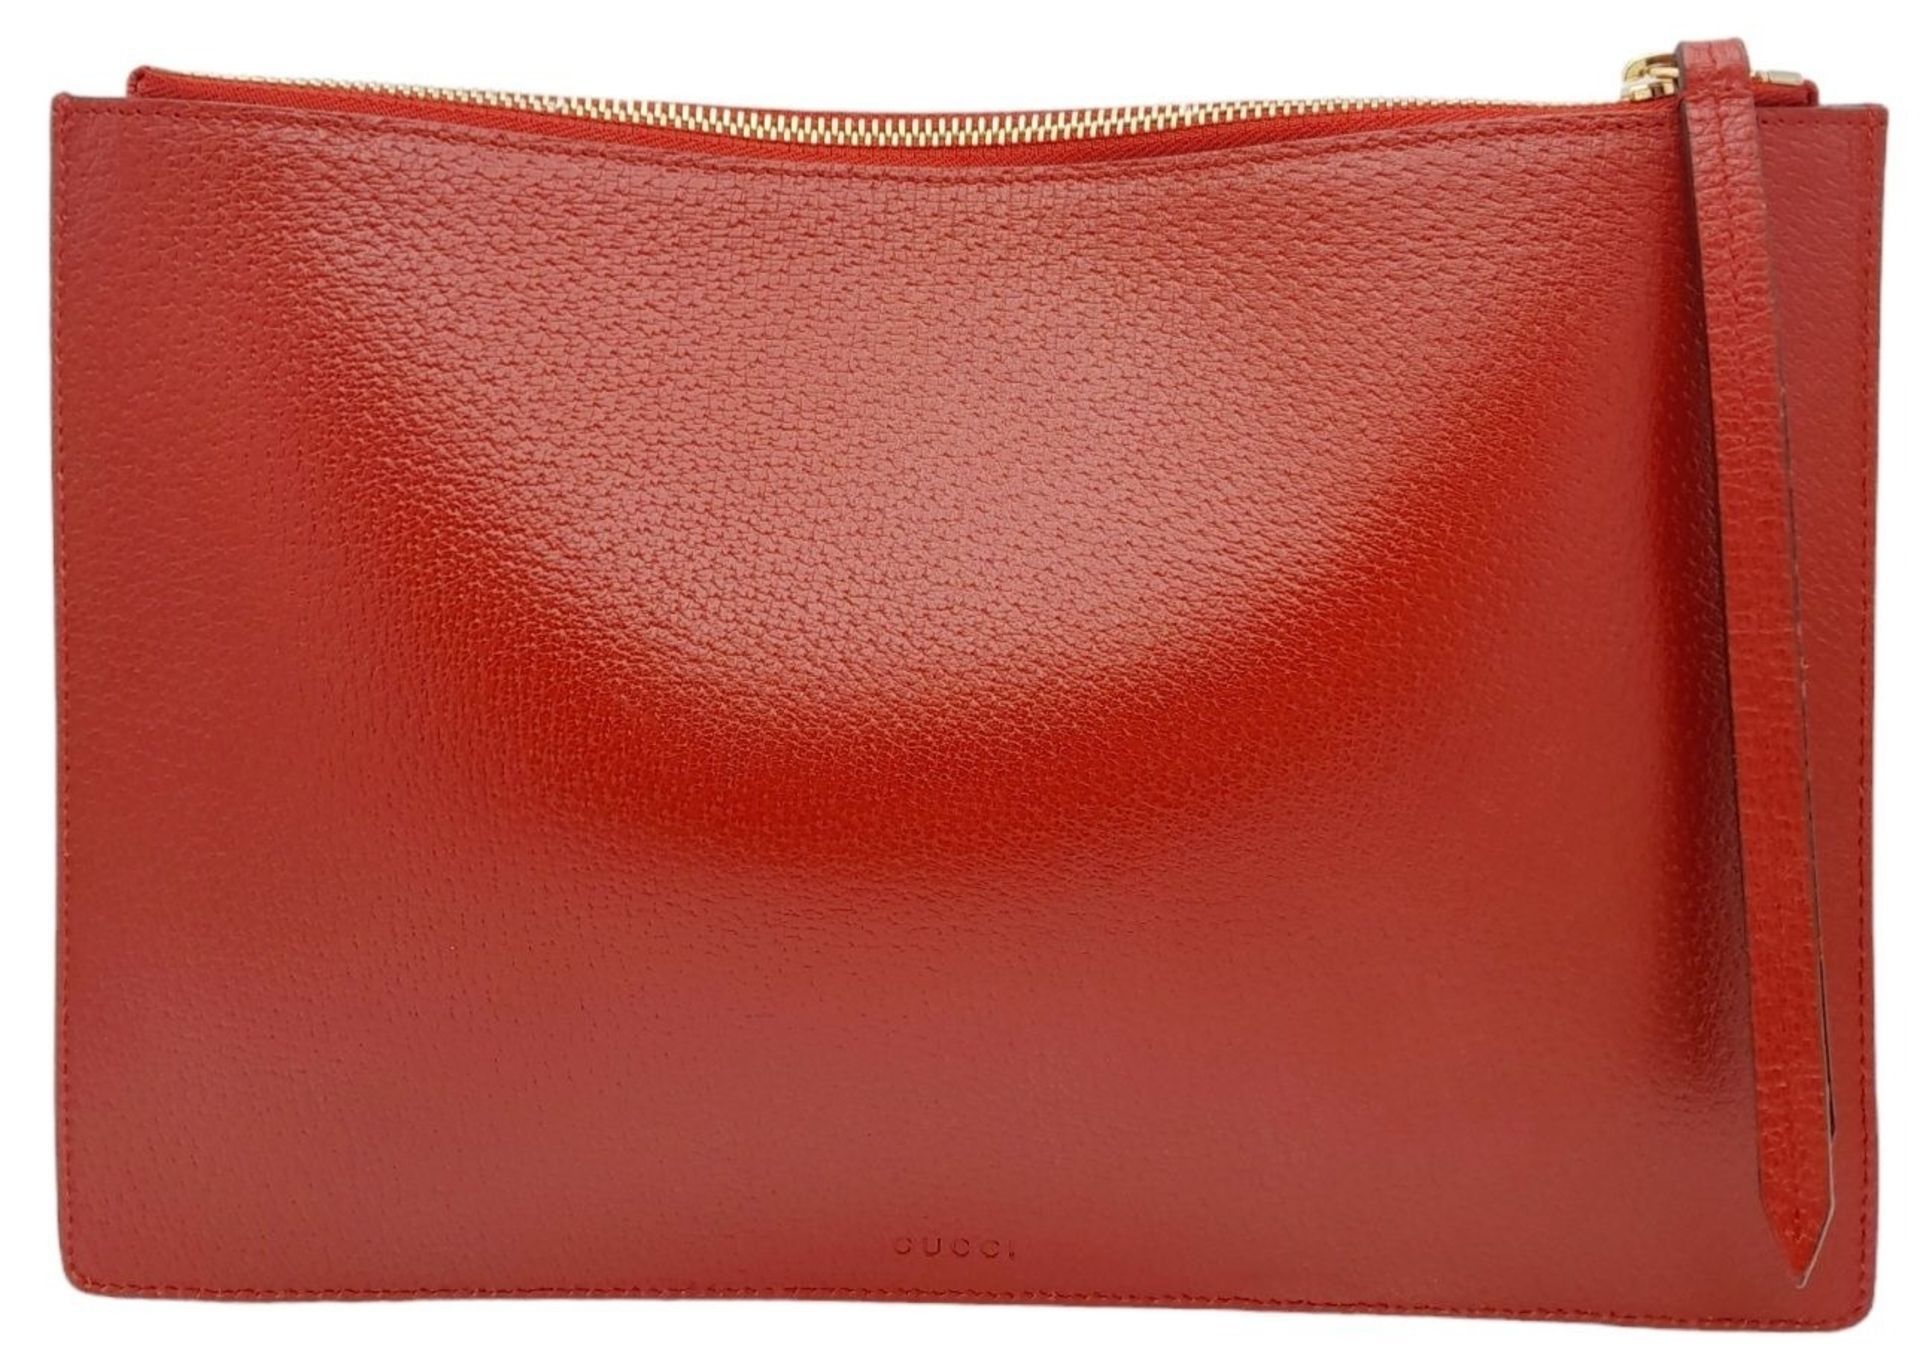 A Gucci Monogram 'Tian' Clutch Bag. Leather exterior with a depiction of a bird in nature, red - Bild 5 aus 7